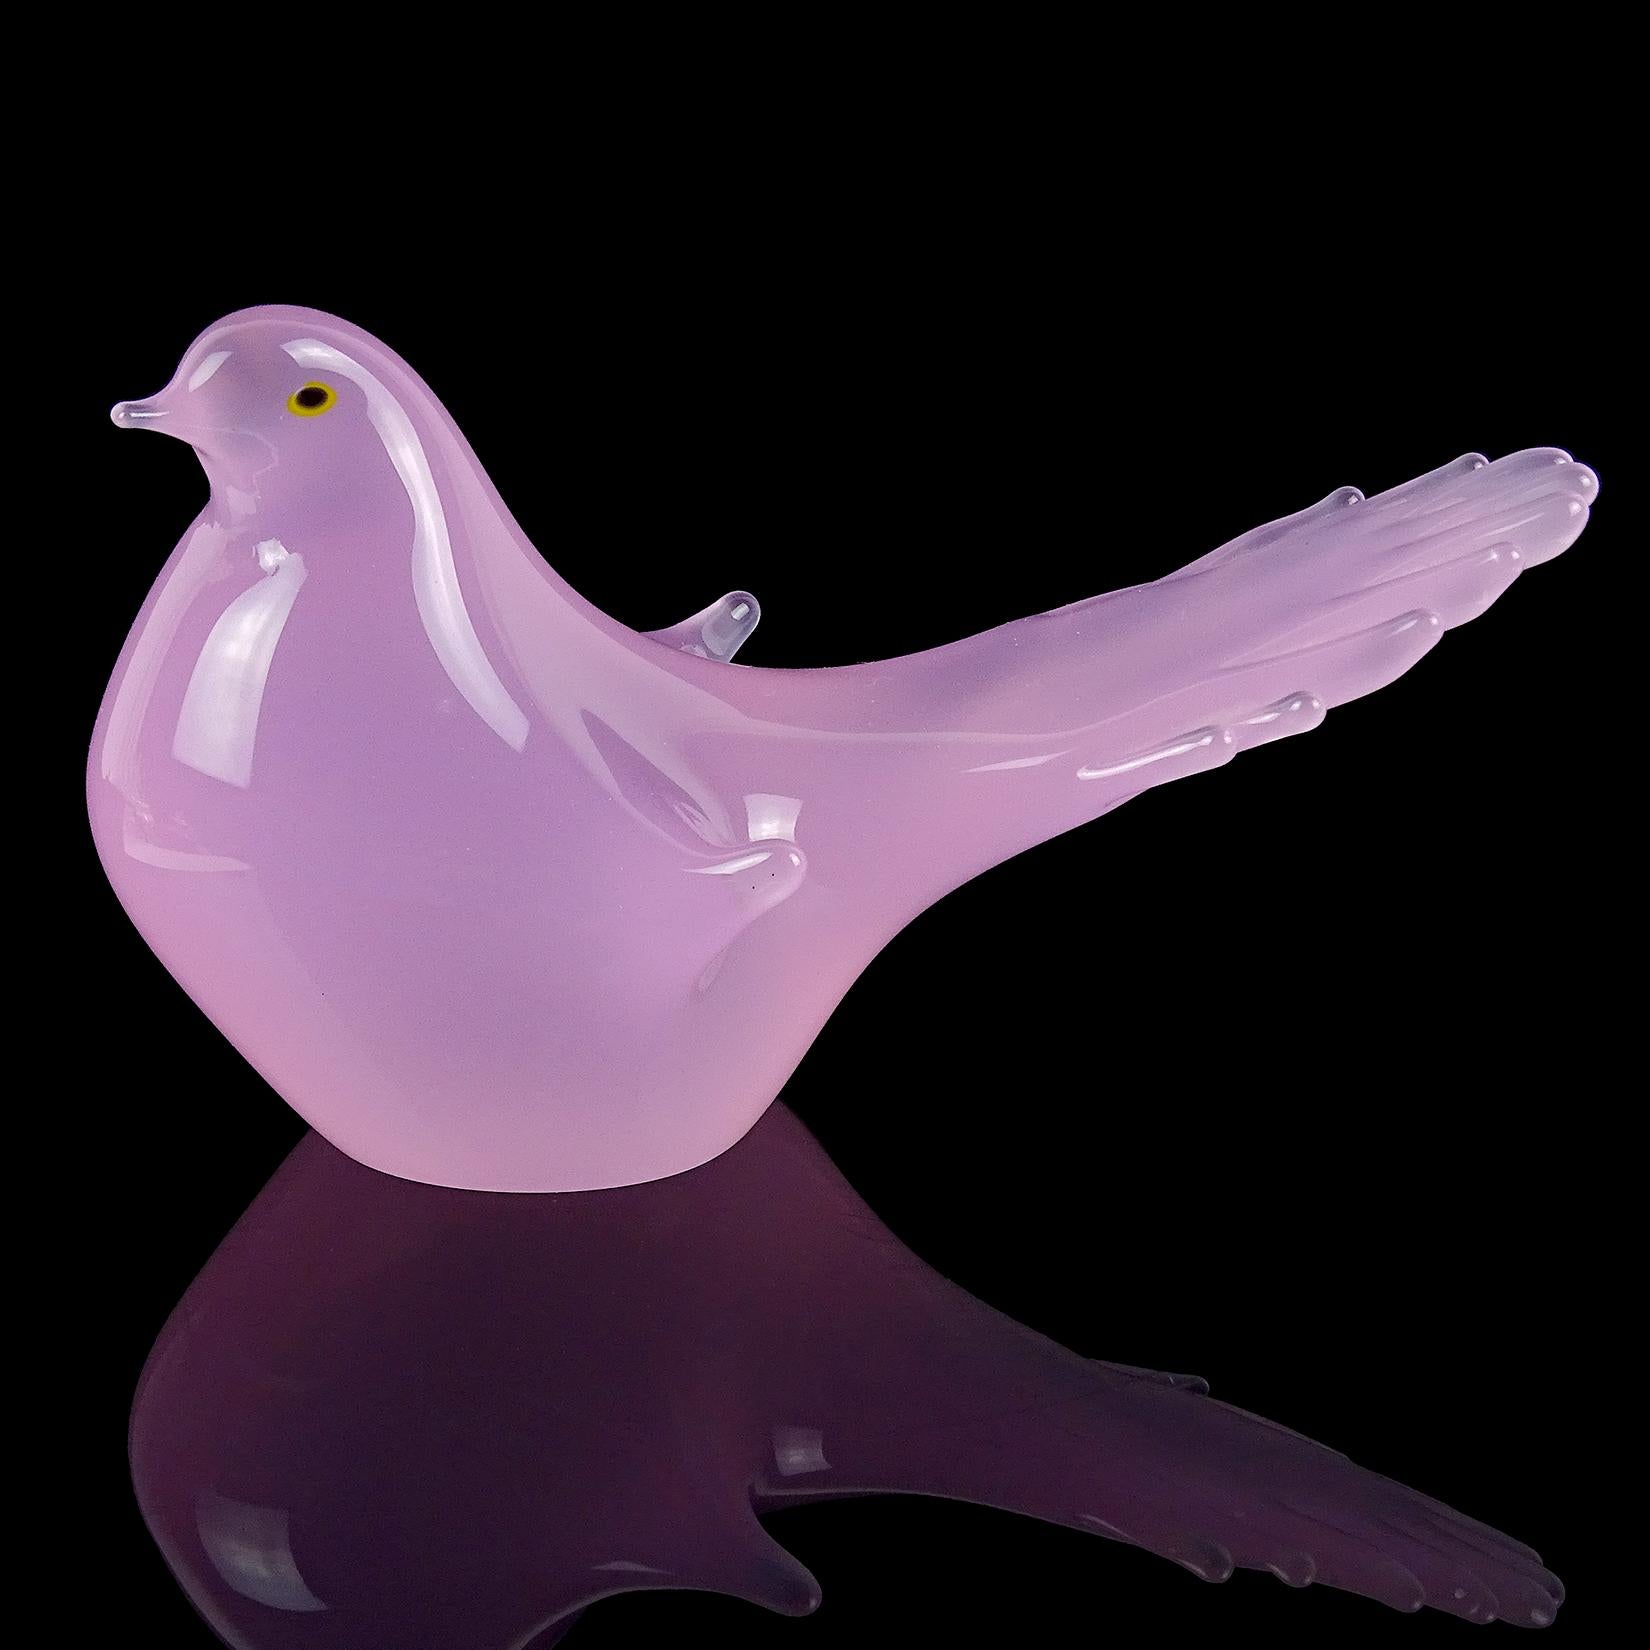 Beautiful vintage Murano hand blown pink opalescent Italian art glass dove bird sculpture. The bird has an elegant shape, with yellow and black eyes. It has a fanned out tail, with wings close to the body. Created in the manner of designer Archimede